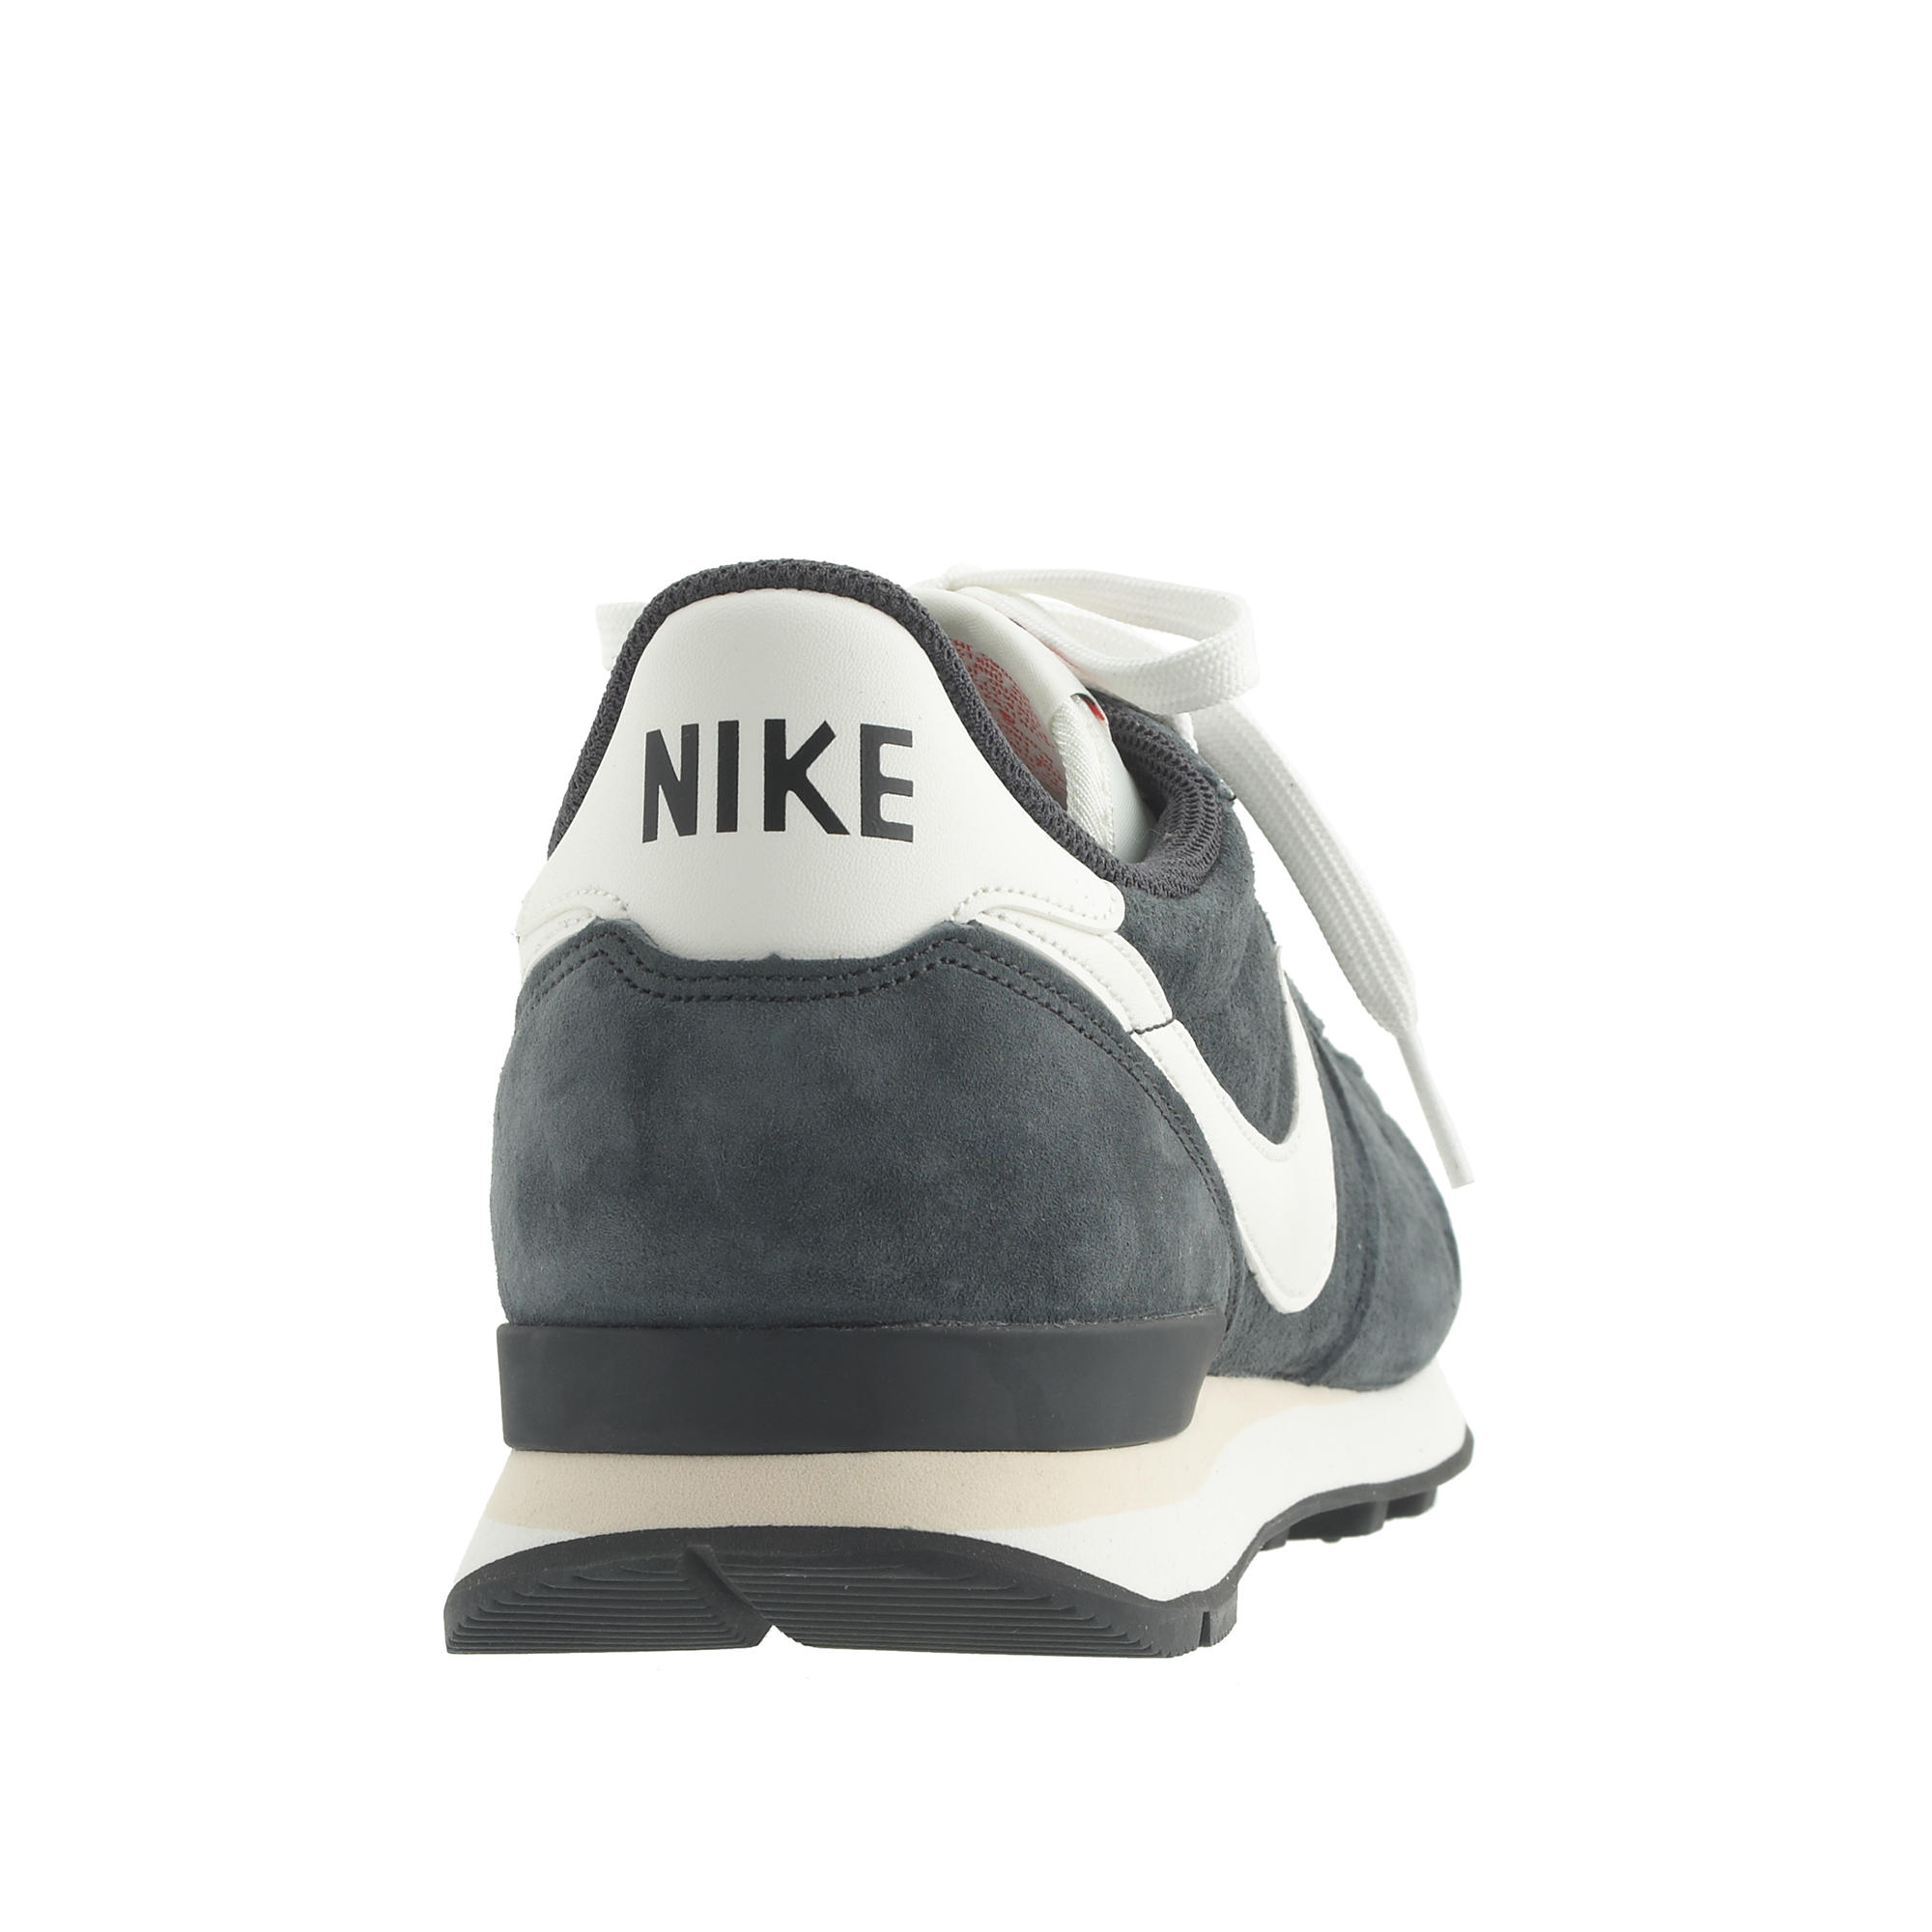 NEW NIKE SPECIAL EDITION WHITE SHOES | Nike, New nike, Womens shoes sneakers